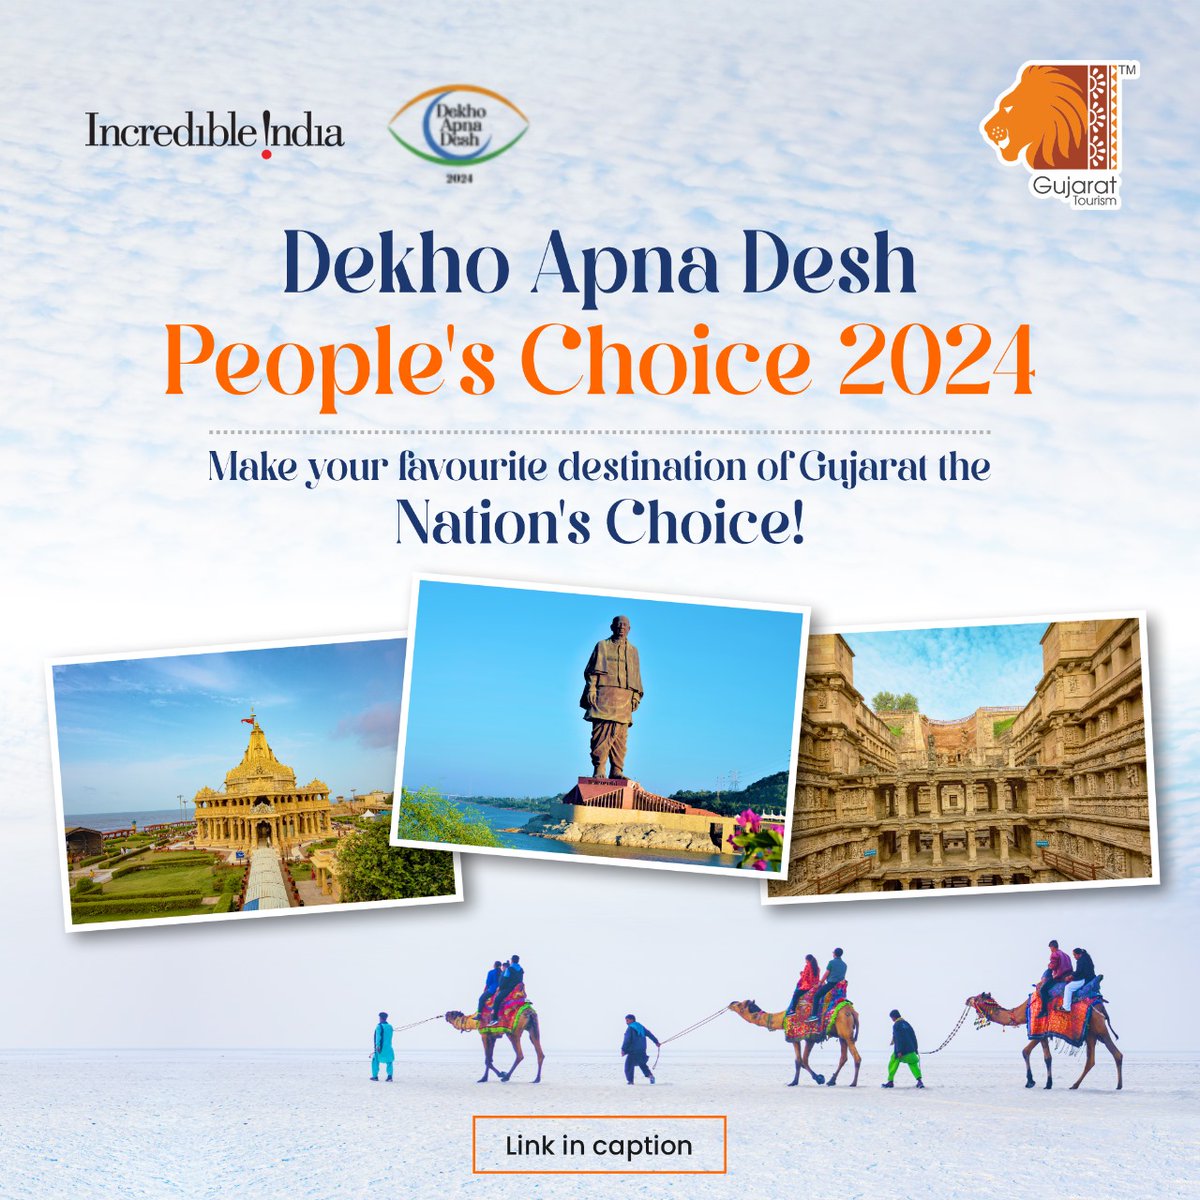 From Saputara's hills to the world's tallest statue in Ekta Nagar, Gujarat has it all! Vote for your favourite tourist spots in Dekho Apna Desh, People's Choice 2024. Your choices will help develop these destinations, contributing to India's path to Viksit Bharat@2047. Click